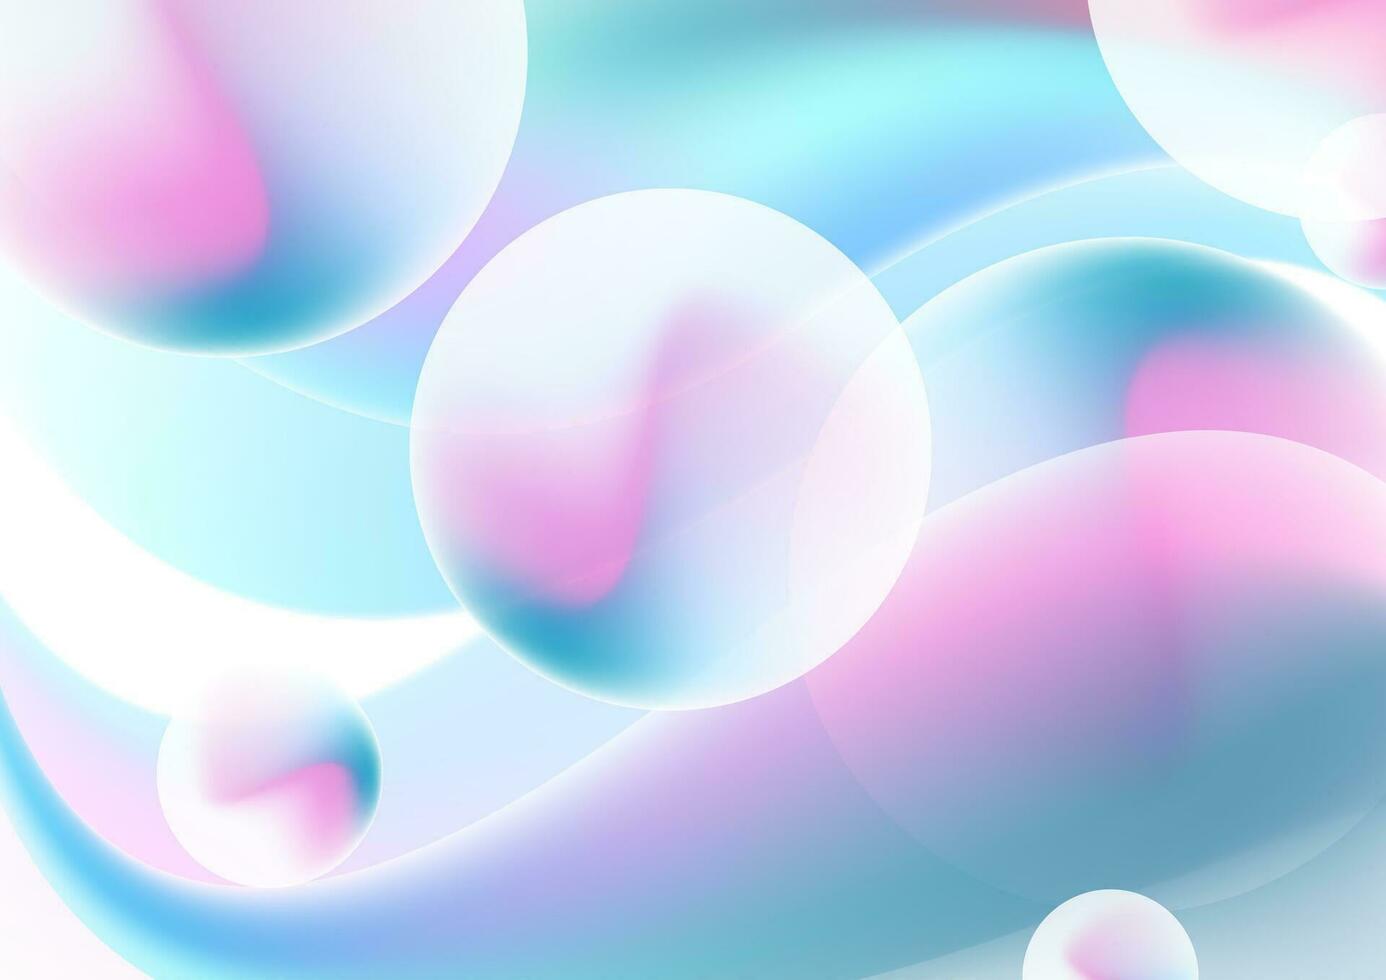 Blue pink 3d blurred sphere balls abstract background vector